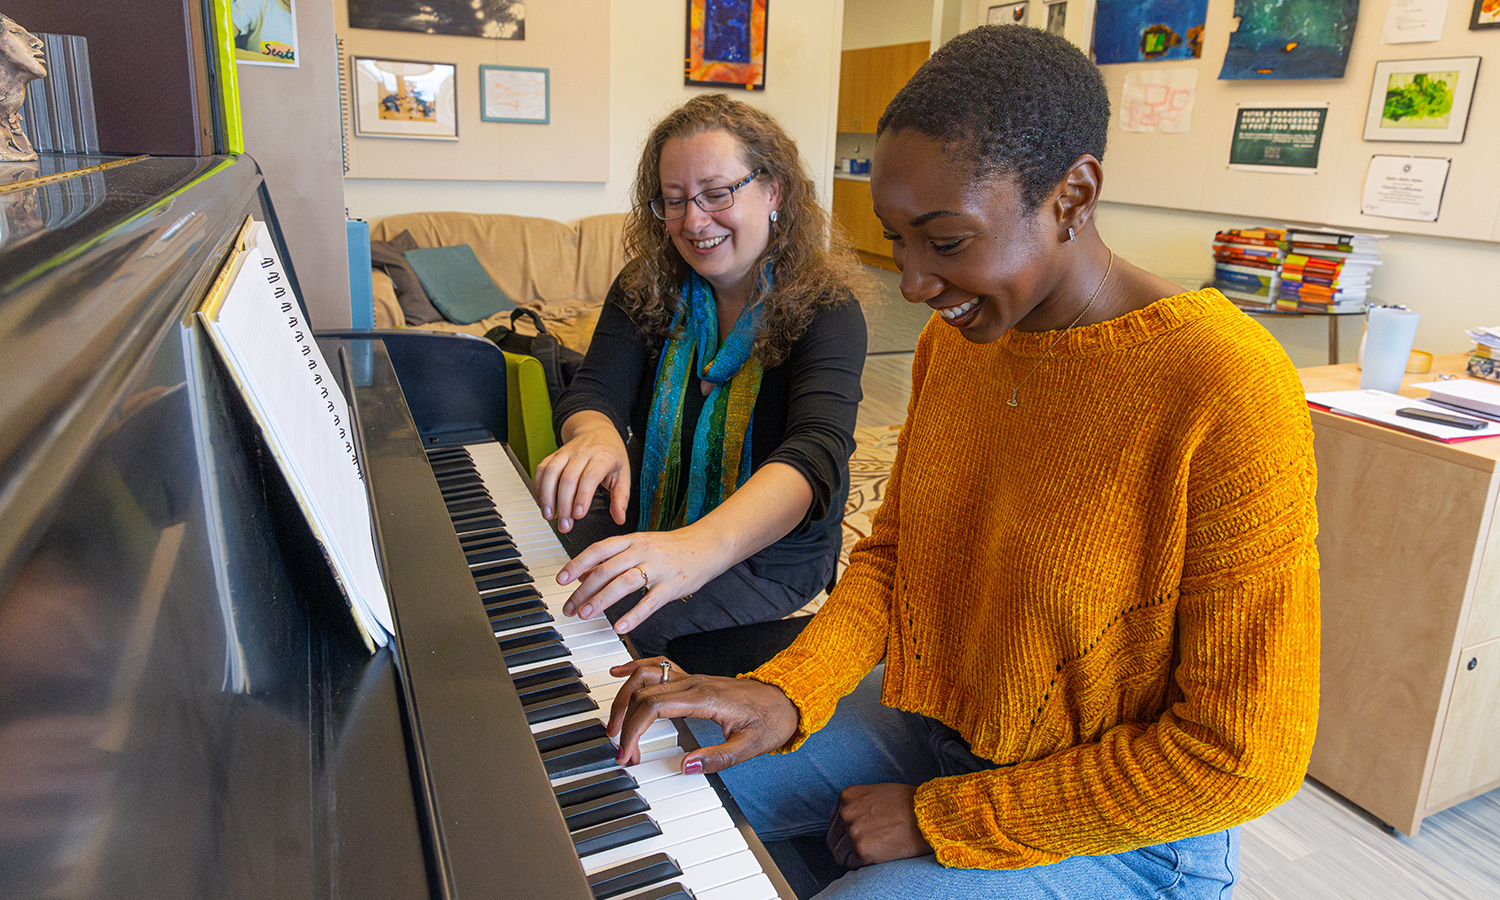 After collaborating on a music theory research project, Eliyah Roberts ’24 plays piano with her adviser, Associate Professor of Music Charity Lofthouse. They will present their work at the Theorizing African American Music conference in Denver in November.